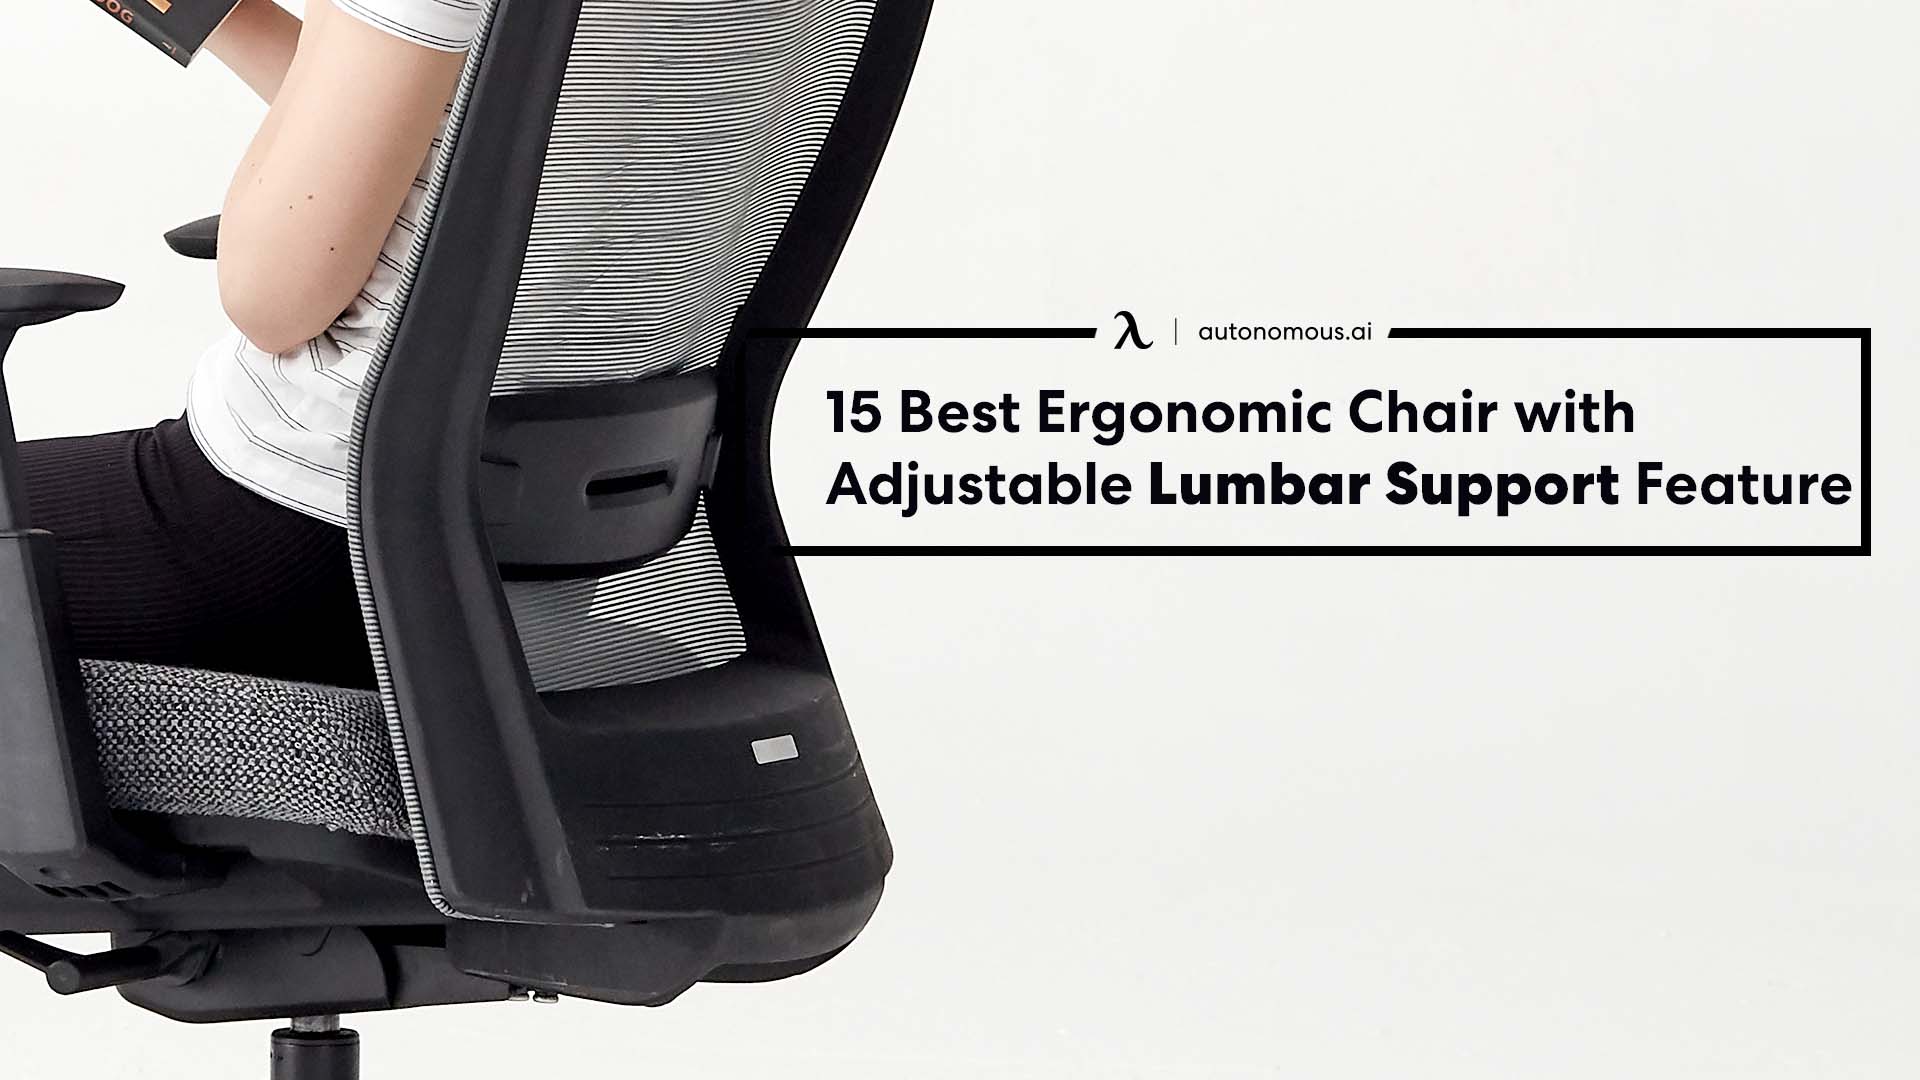 15 Best Ergonomic Chairs with Adjustable Lumbar Support Feature